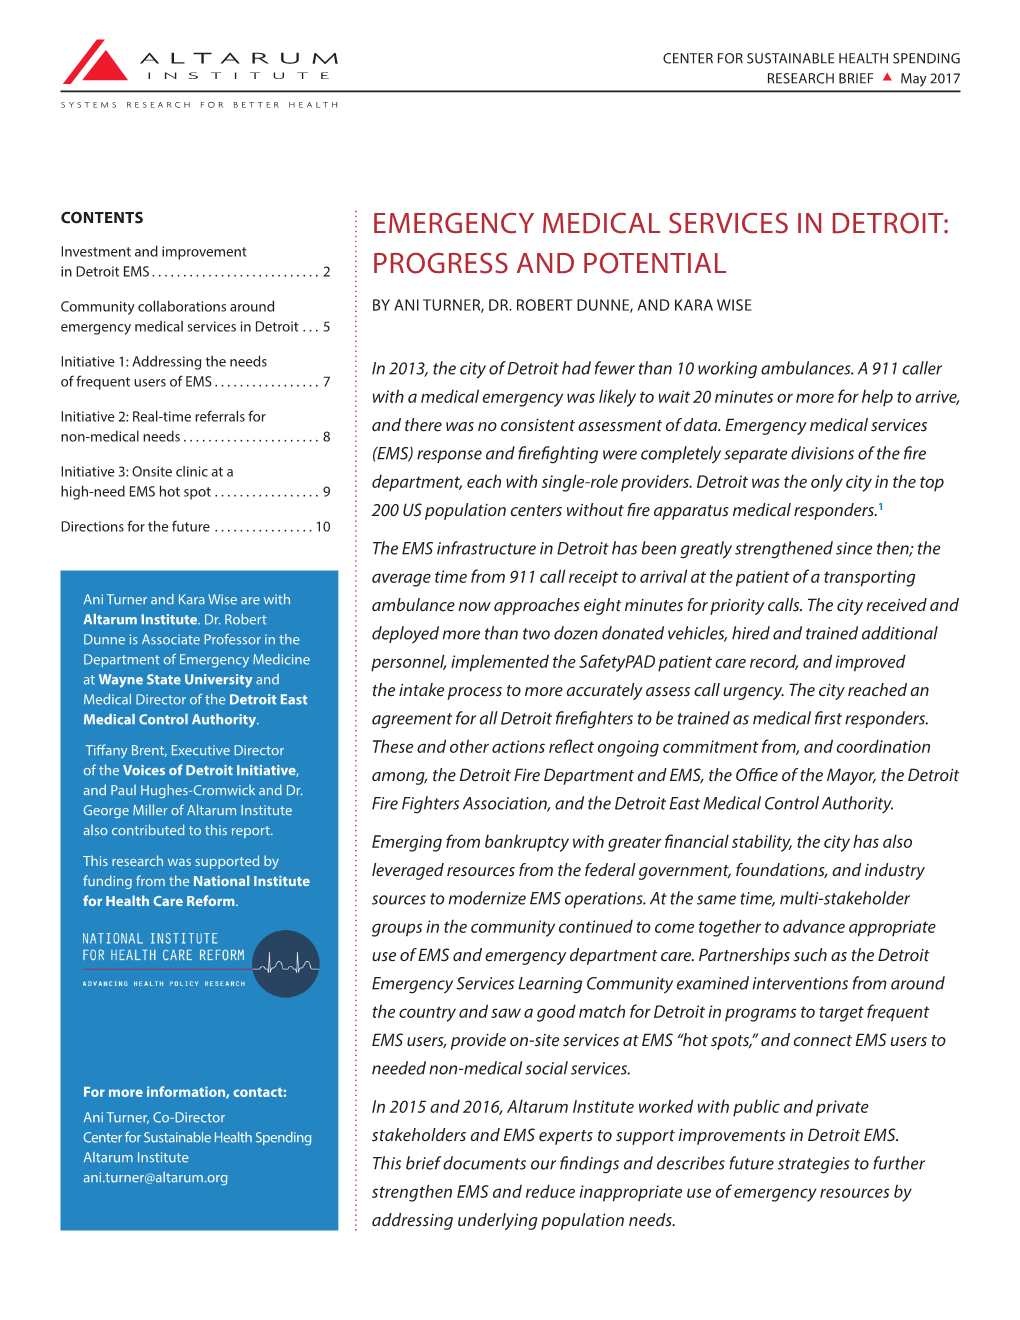 Emergency Medical Services in Detroit: Progress and Potential 2 CENTER for SUSTAINABLE HEALTH SPENDING RESEARCH BRIEF  May 2017